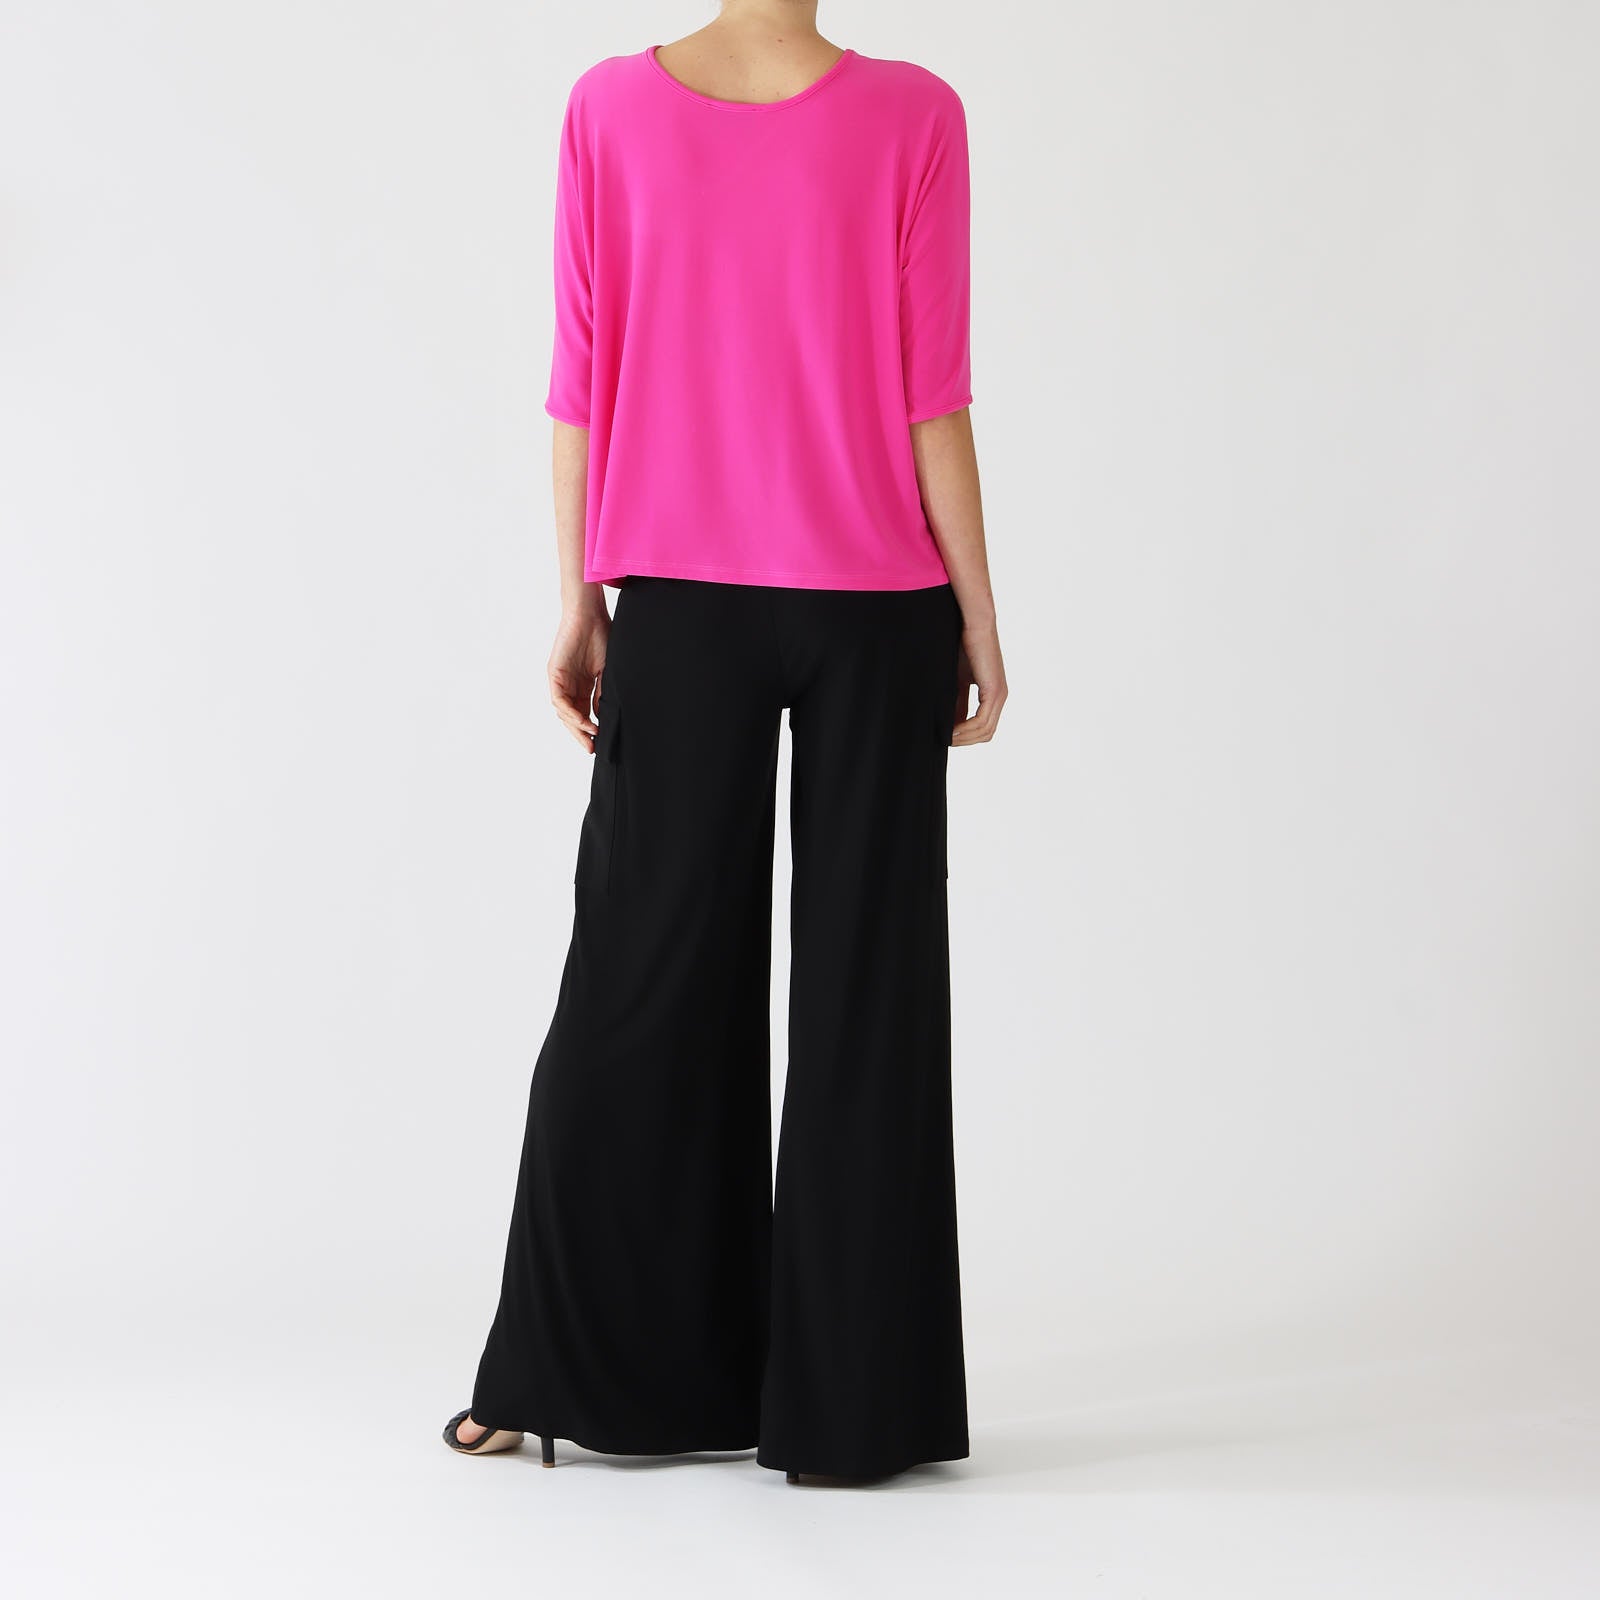 Ultra Pink Relaxed V-Neck Top